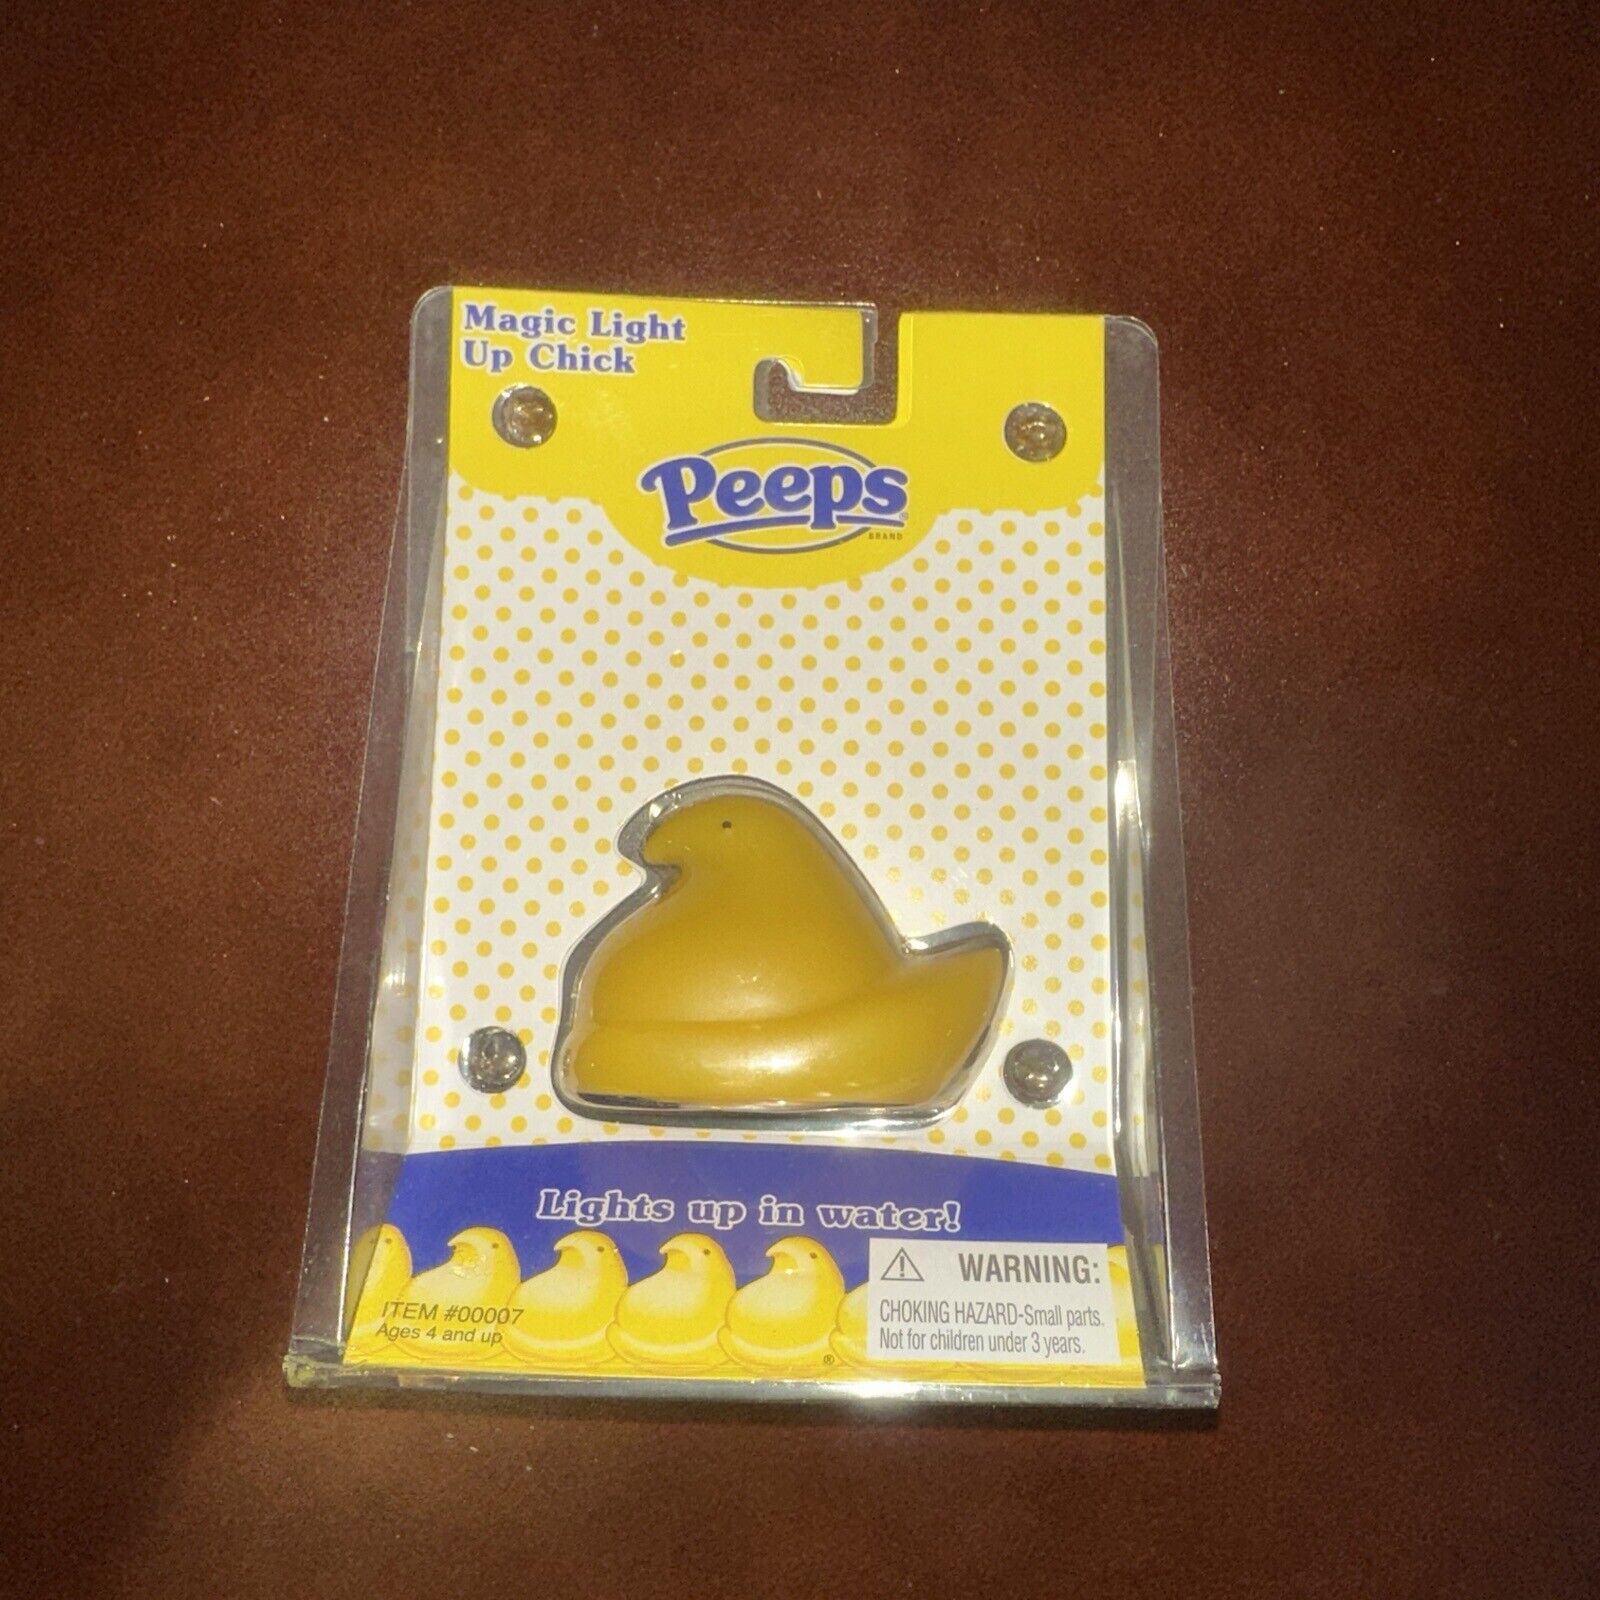 2007 Peeps Magic Light Up Yellow Chick Bath Toy ~ New in Sealed Package